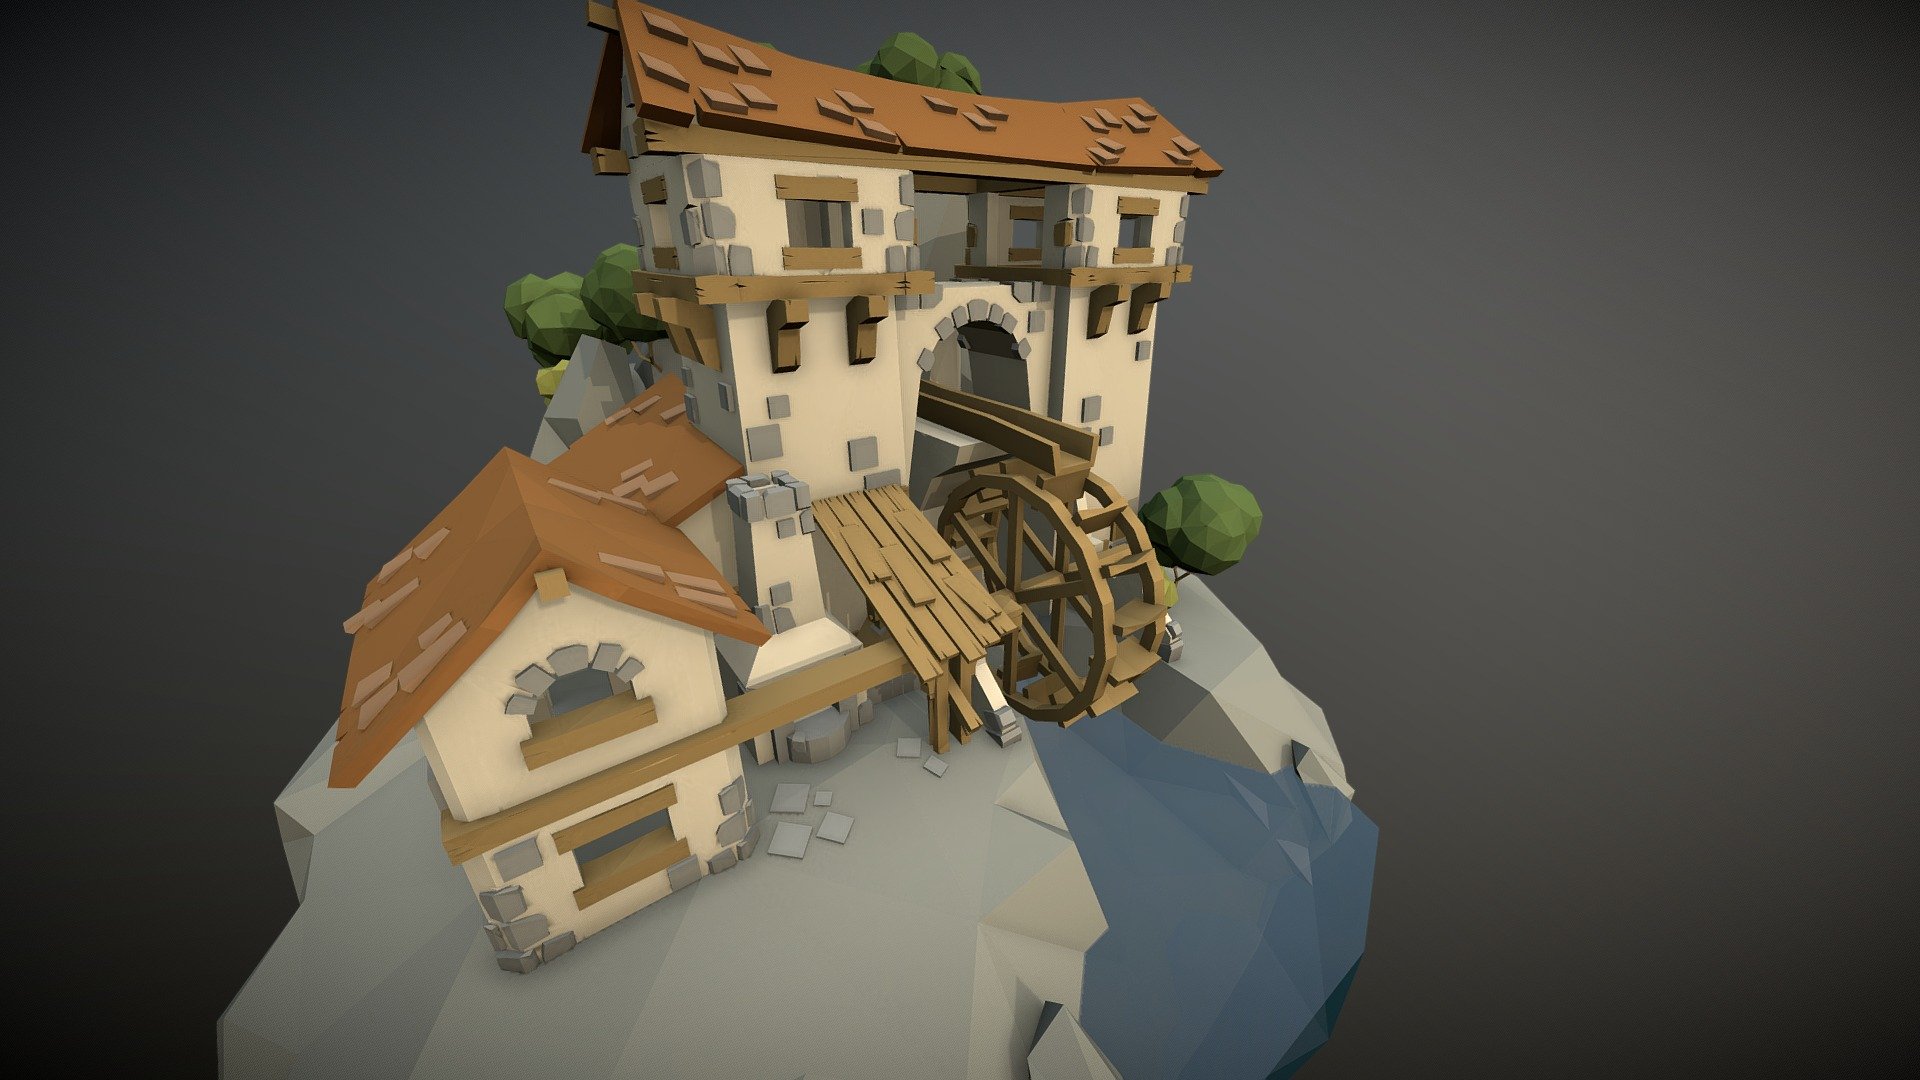 Entry for Medieval Contest. 

I recently added an animation to the water wheel which you can view here.

https://sketchfab.com/models/9651320b057f415a9188279b82f9be78 - Medieval Times - Blacksmith's Workshop - 3D model by Zenchuck 3d model